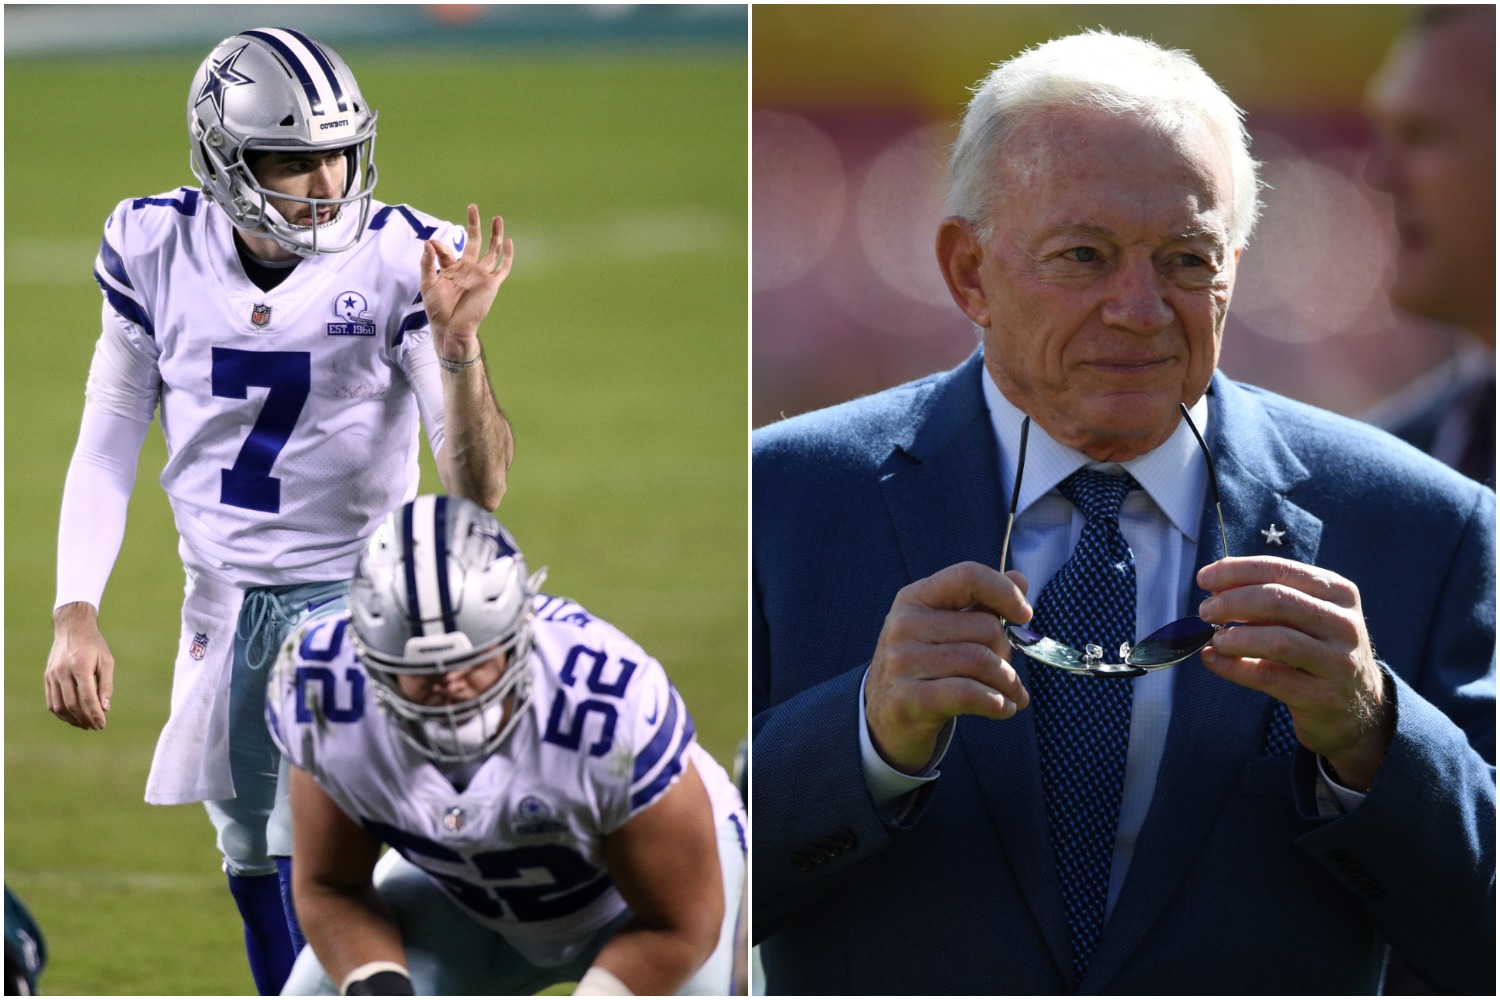 Jerry Jones threw Dallas Cowboys quarterback Ben DiNucci under the bus with an eyebrow-raising comment that seemed totally unwarranted.